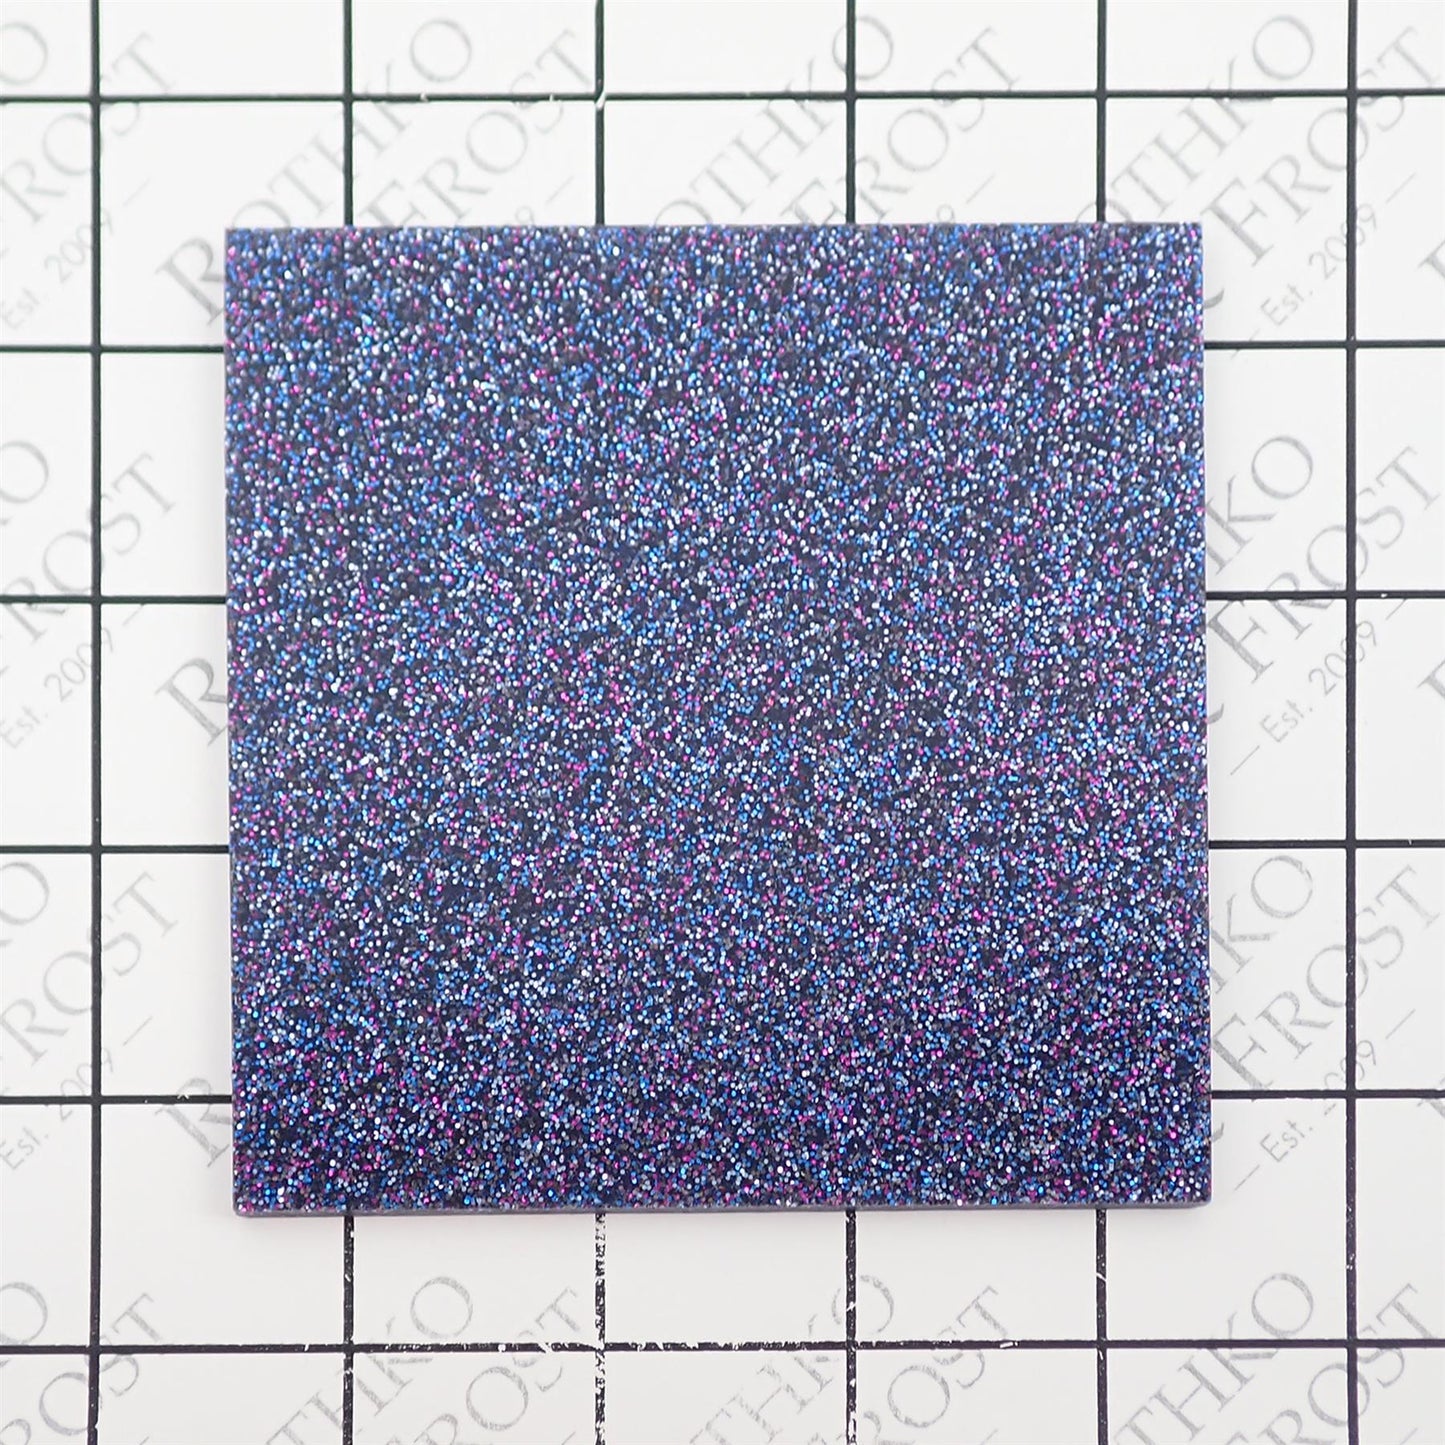 Incudo Blue Holographic Glitter Acrylic Sheet - 150x125x3mm